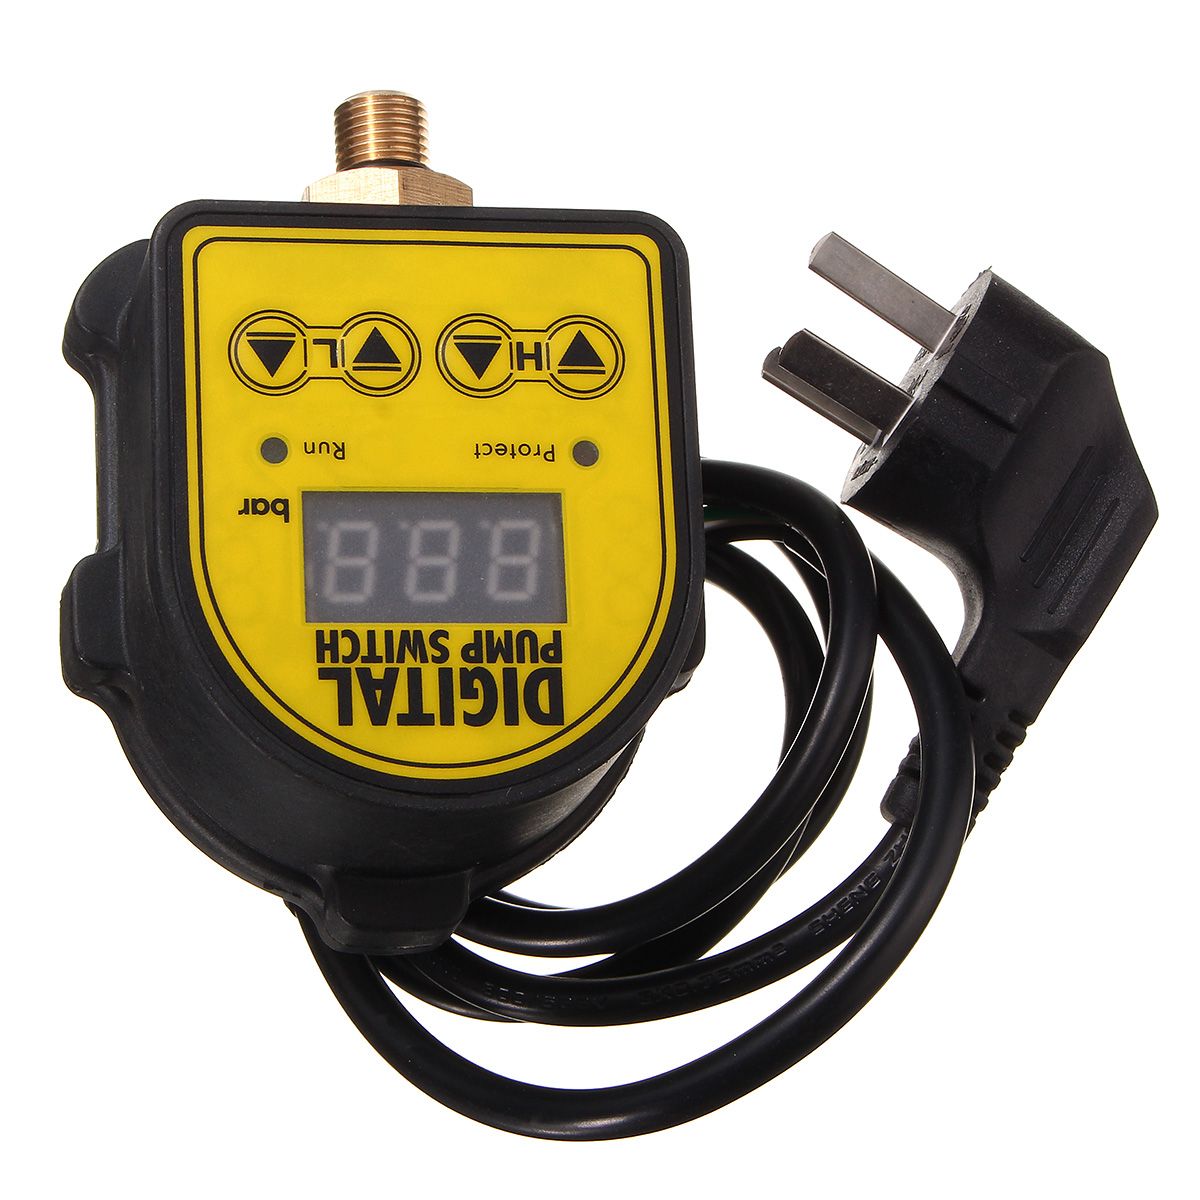 Automatic-Digital-Pressure-Controller-ON-OFF-Switch-220V-For-Water-Ail-Gas-Pump-1218508